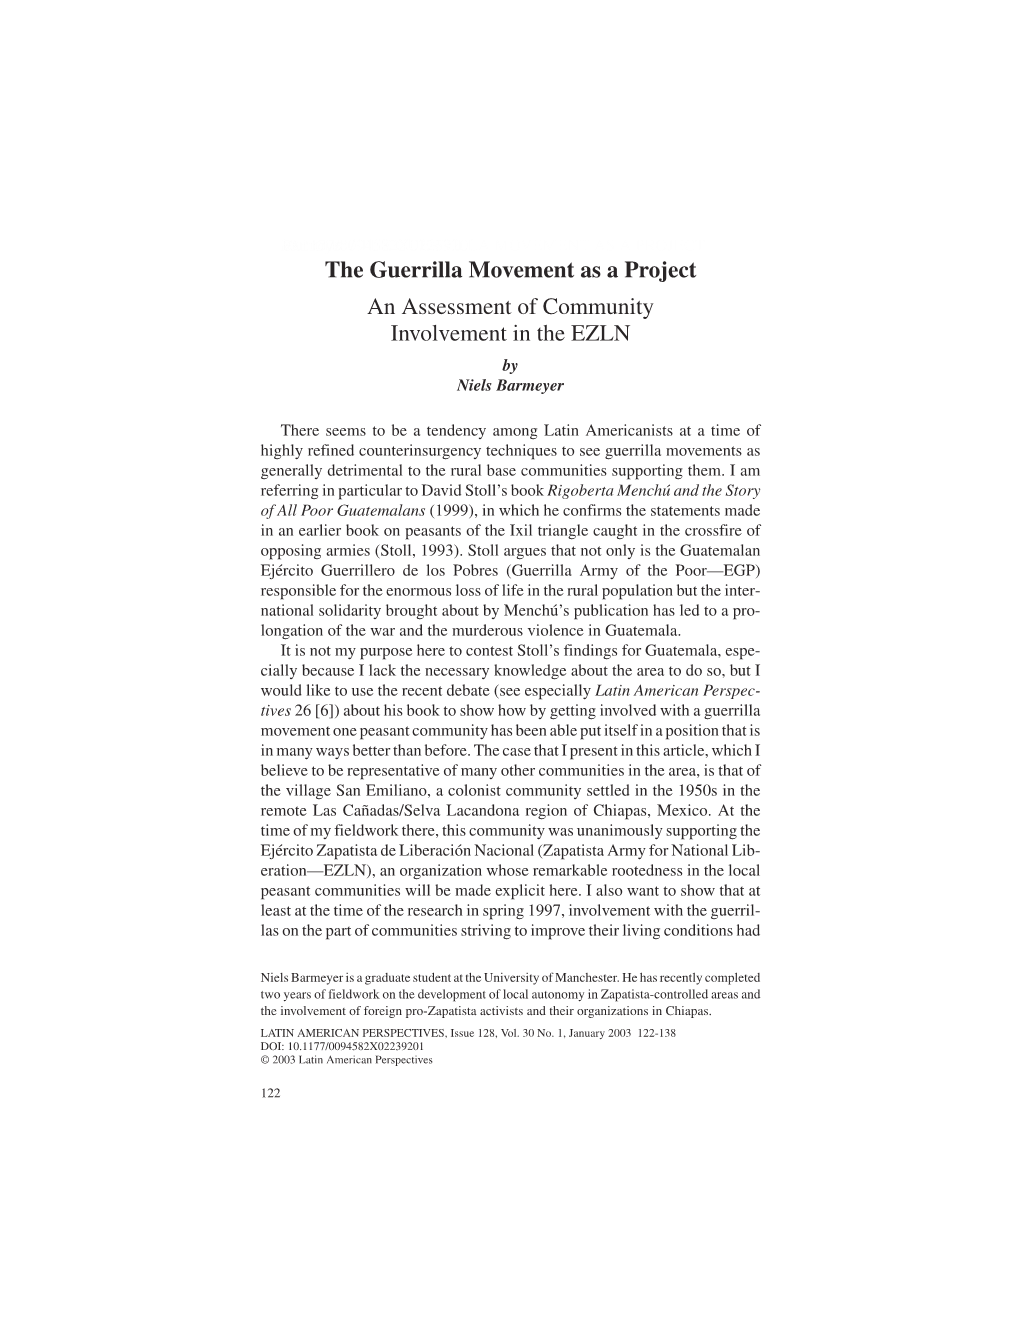 The Guerrilla Movement As a Project an Assessment of Community Involvement in the EZLN by Niels Barmeyer